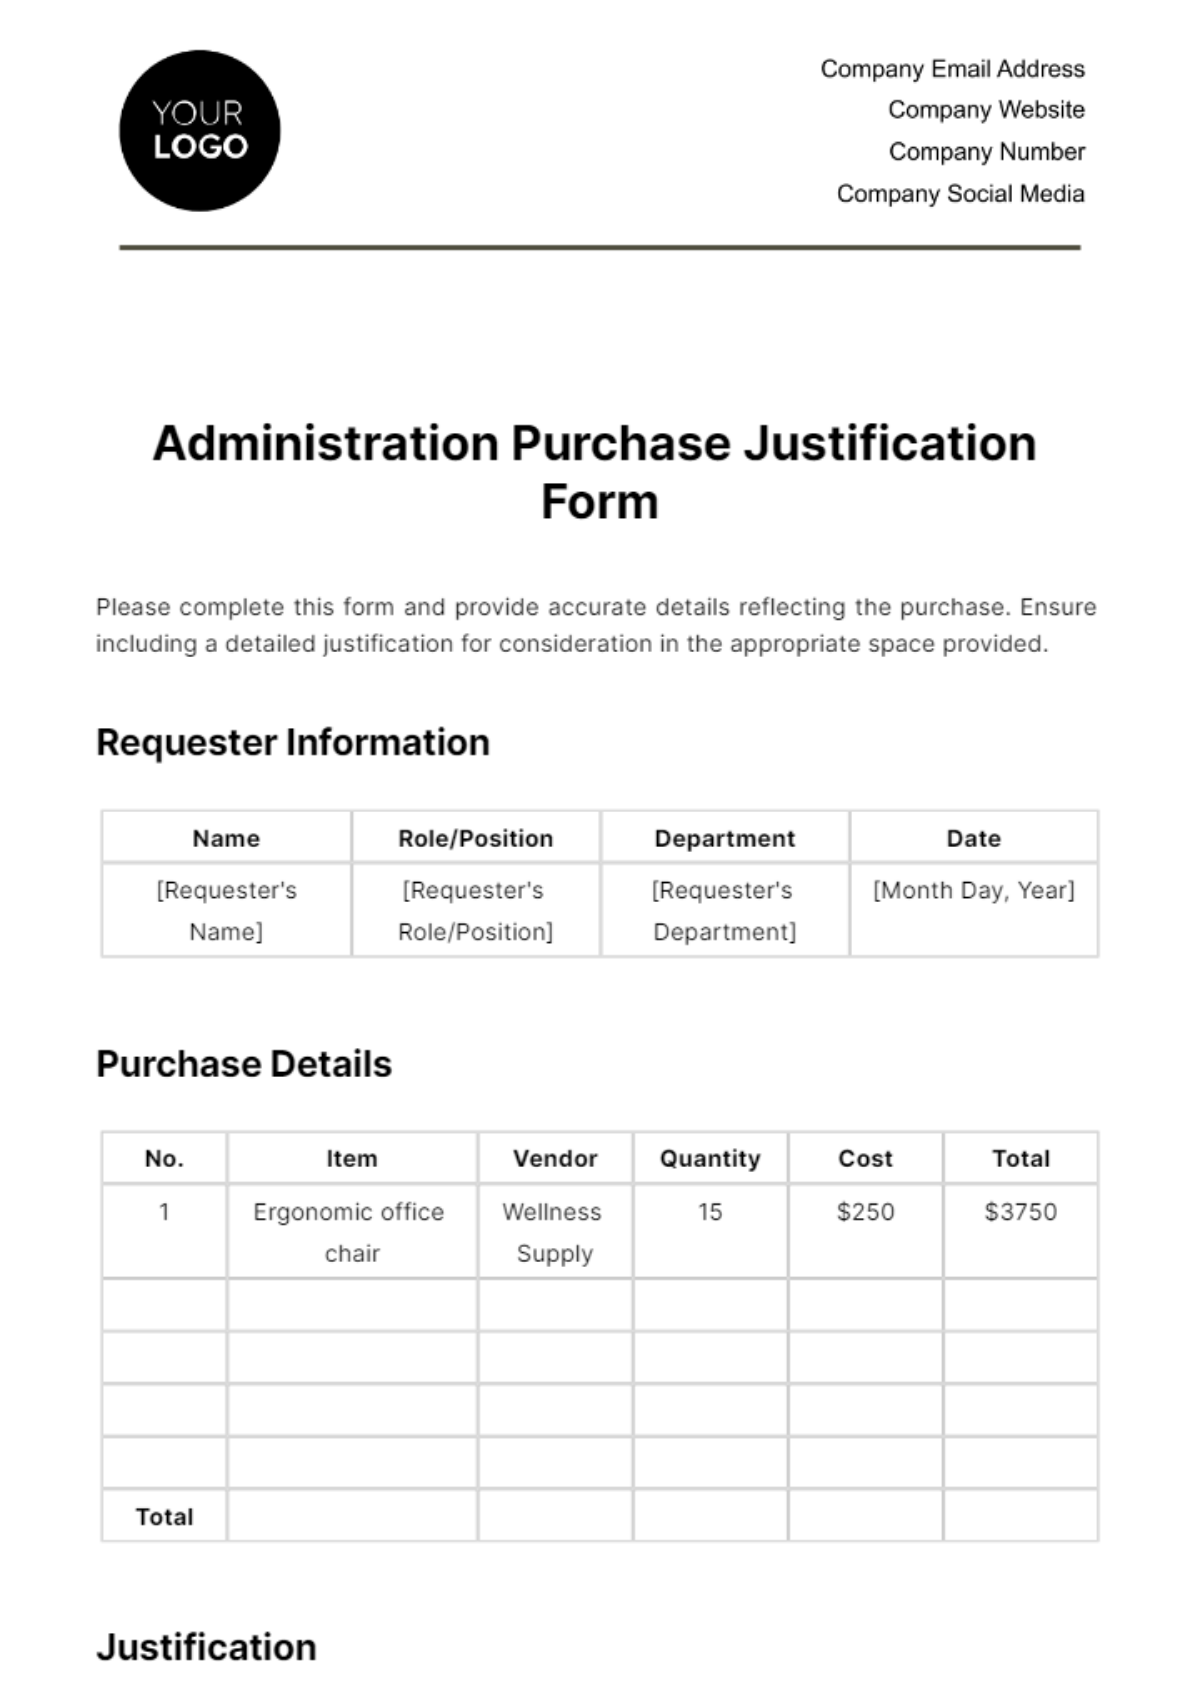 Free Administration Purchase Justification Form Template